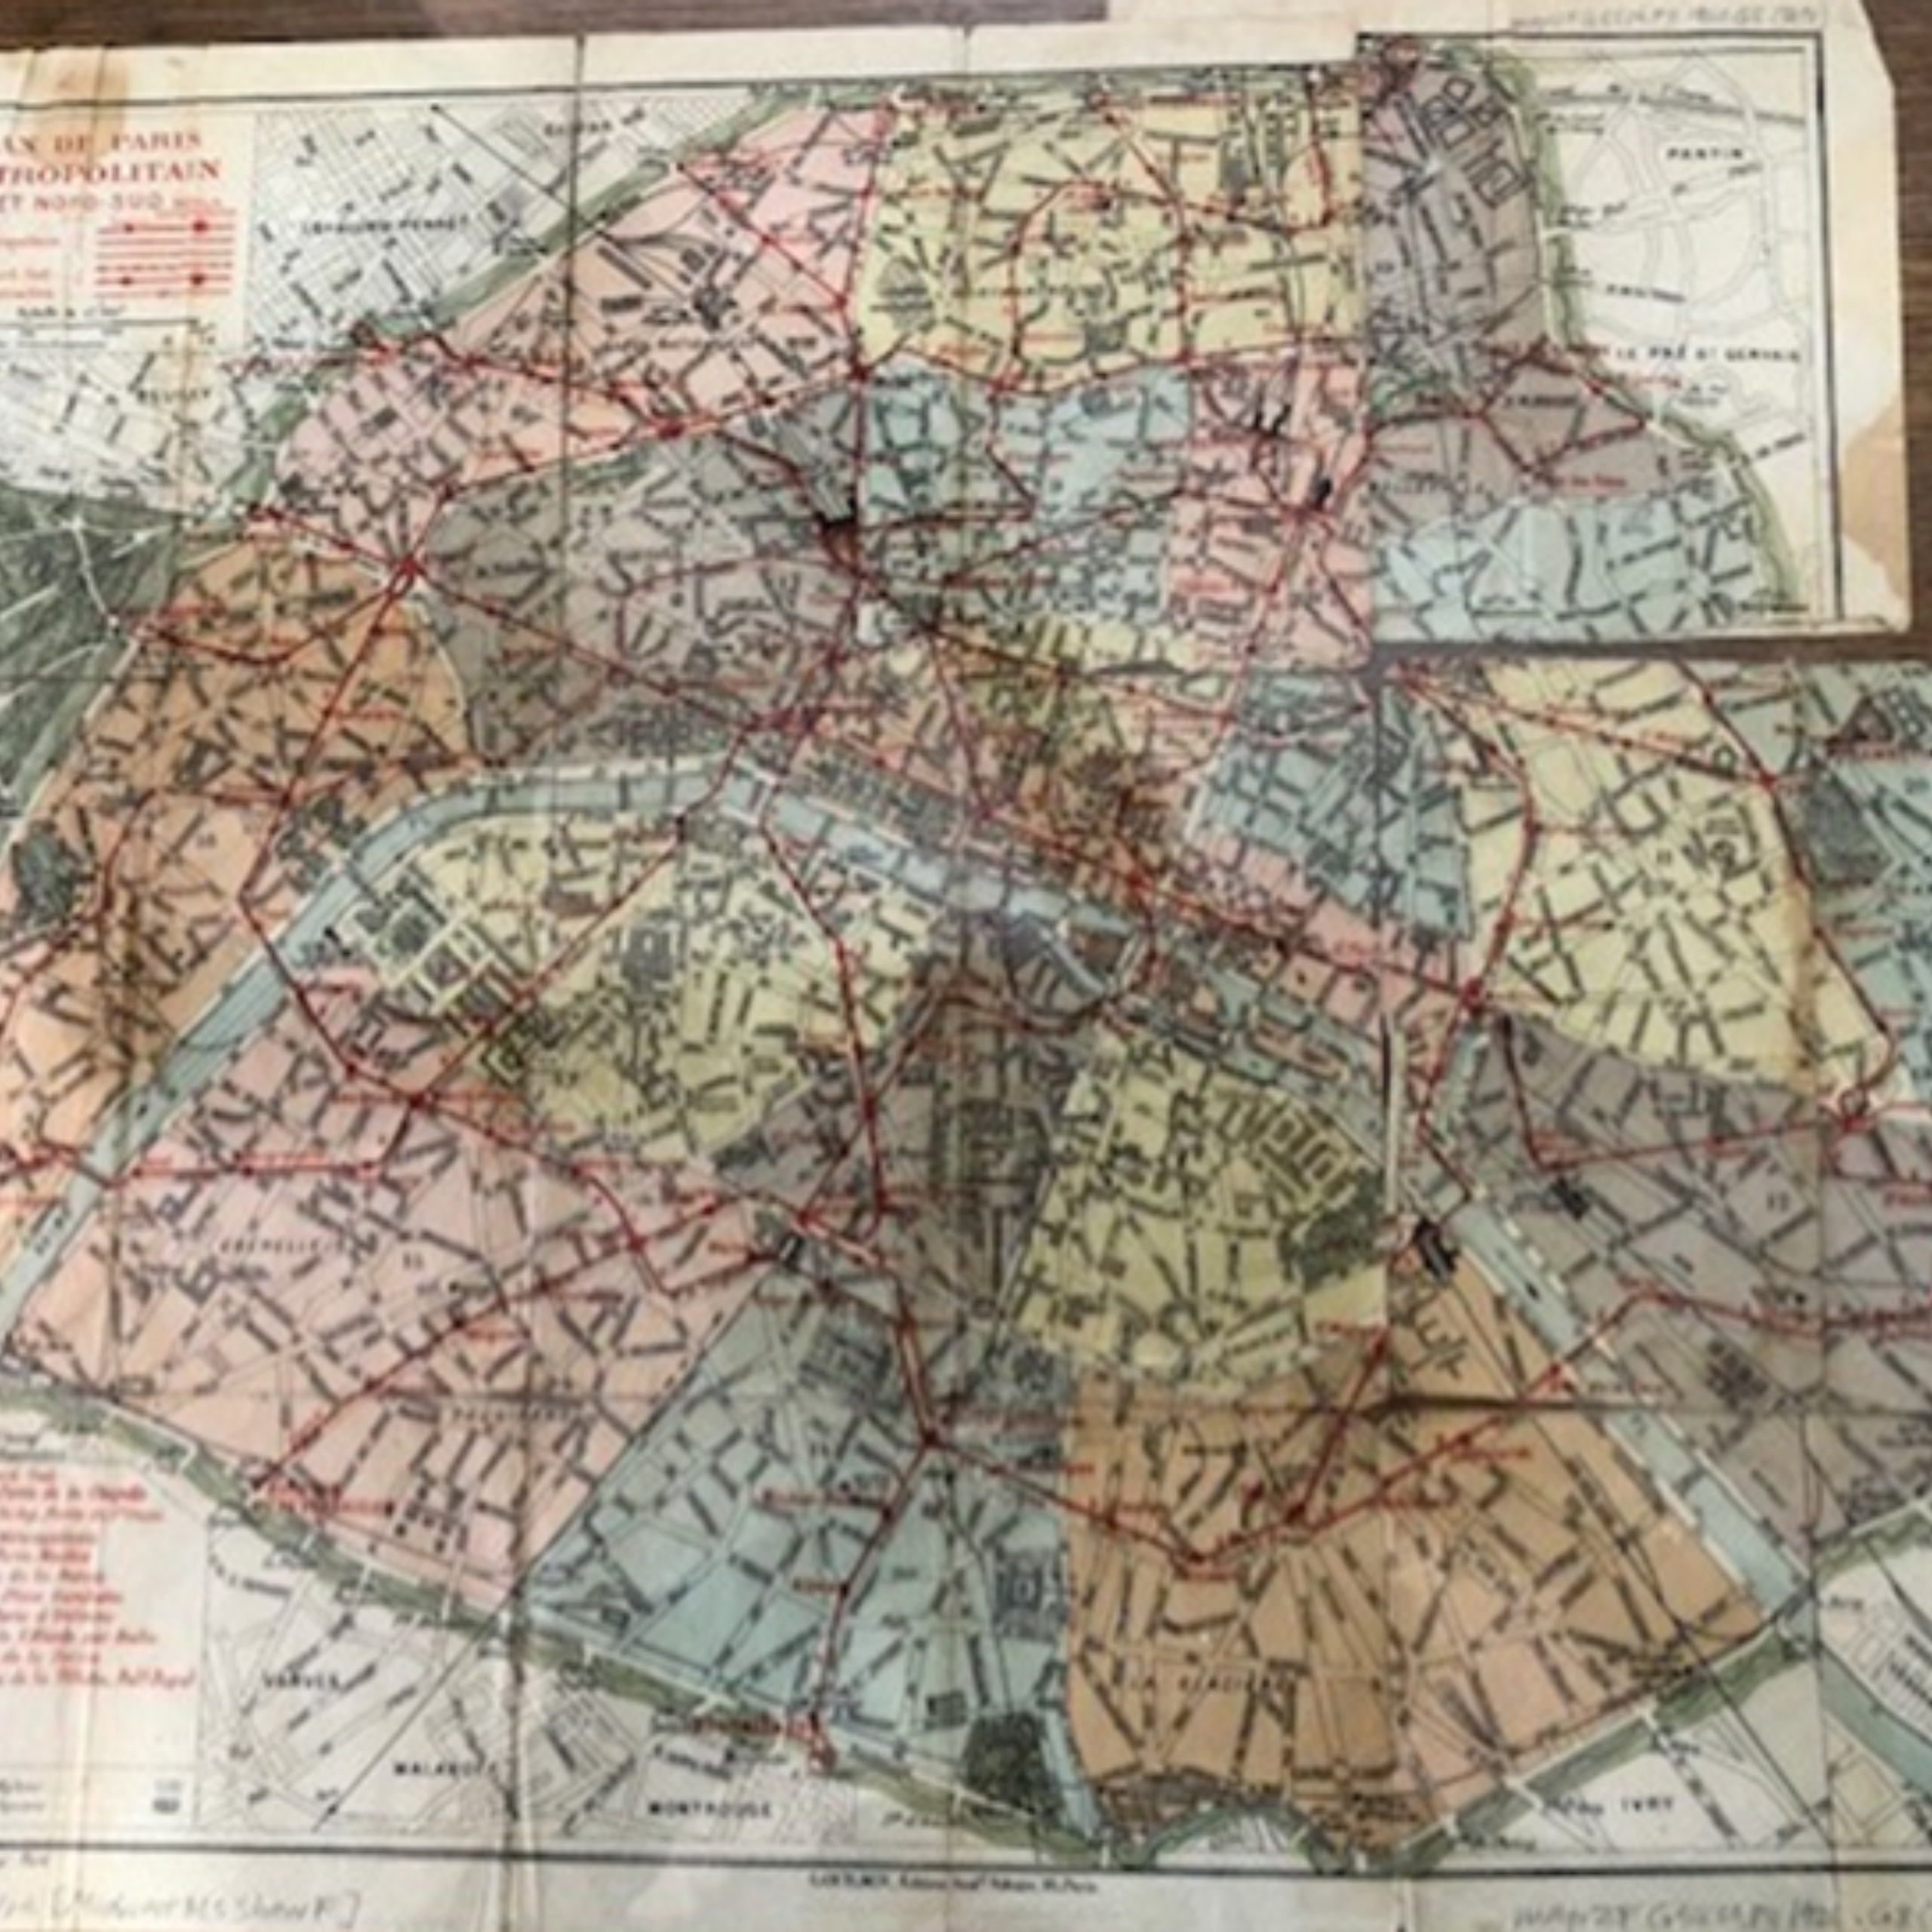 Image of a historic map of Paris, with the arrondissements coordinated and separated by color.